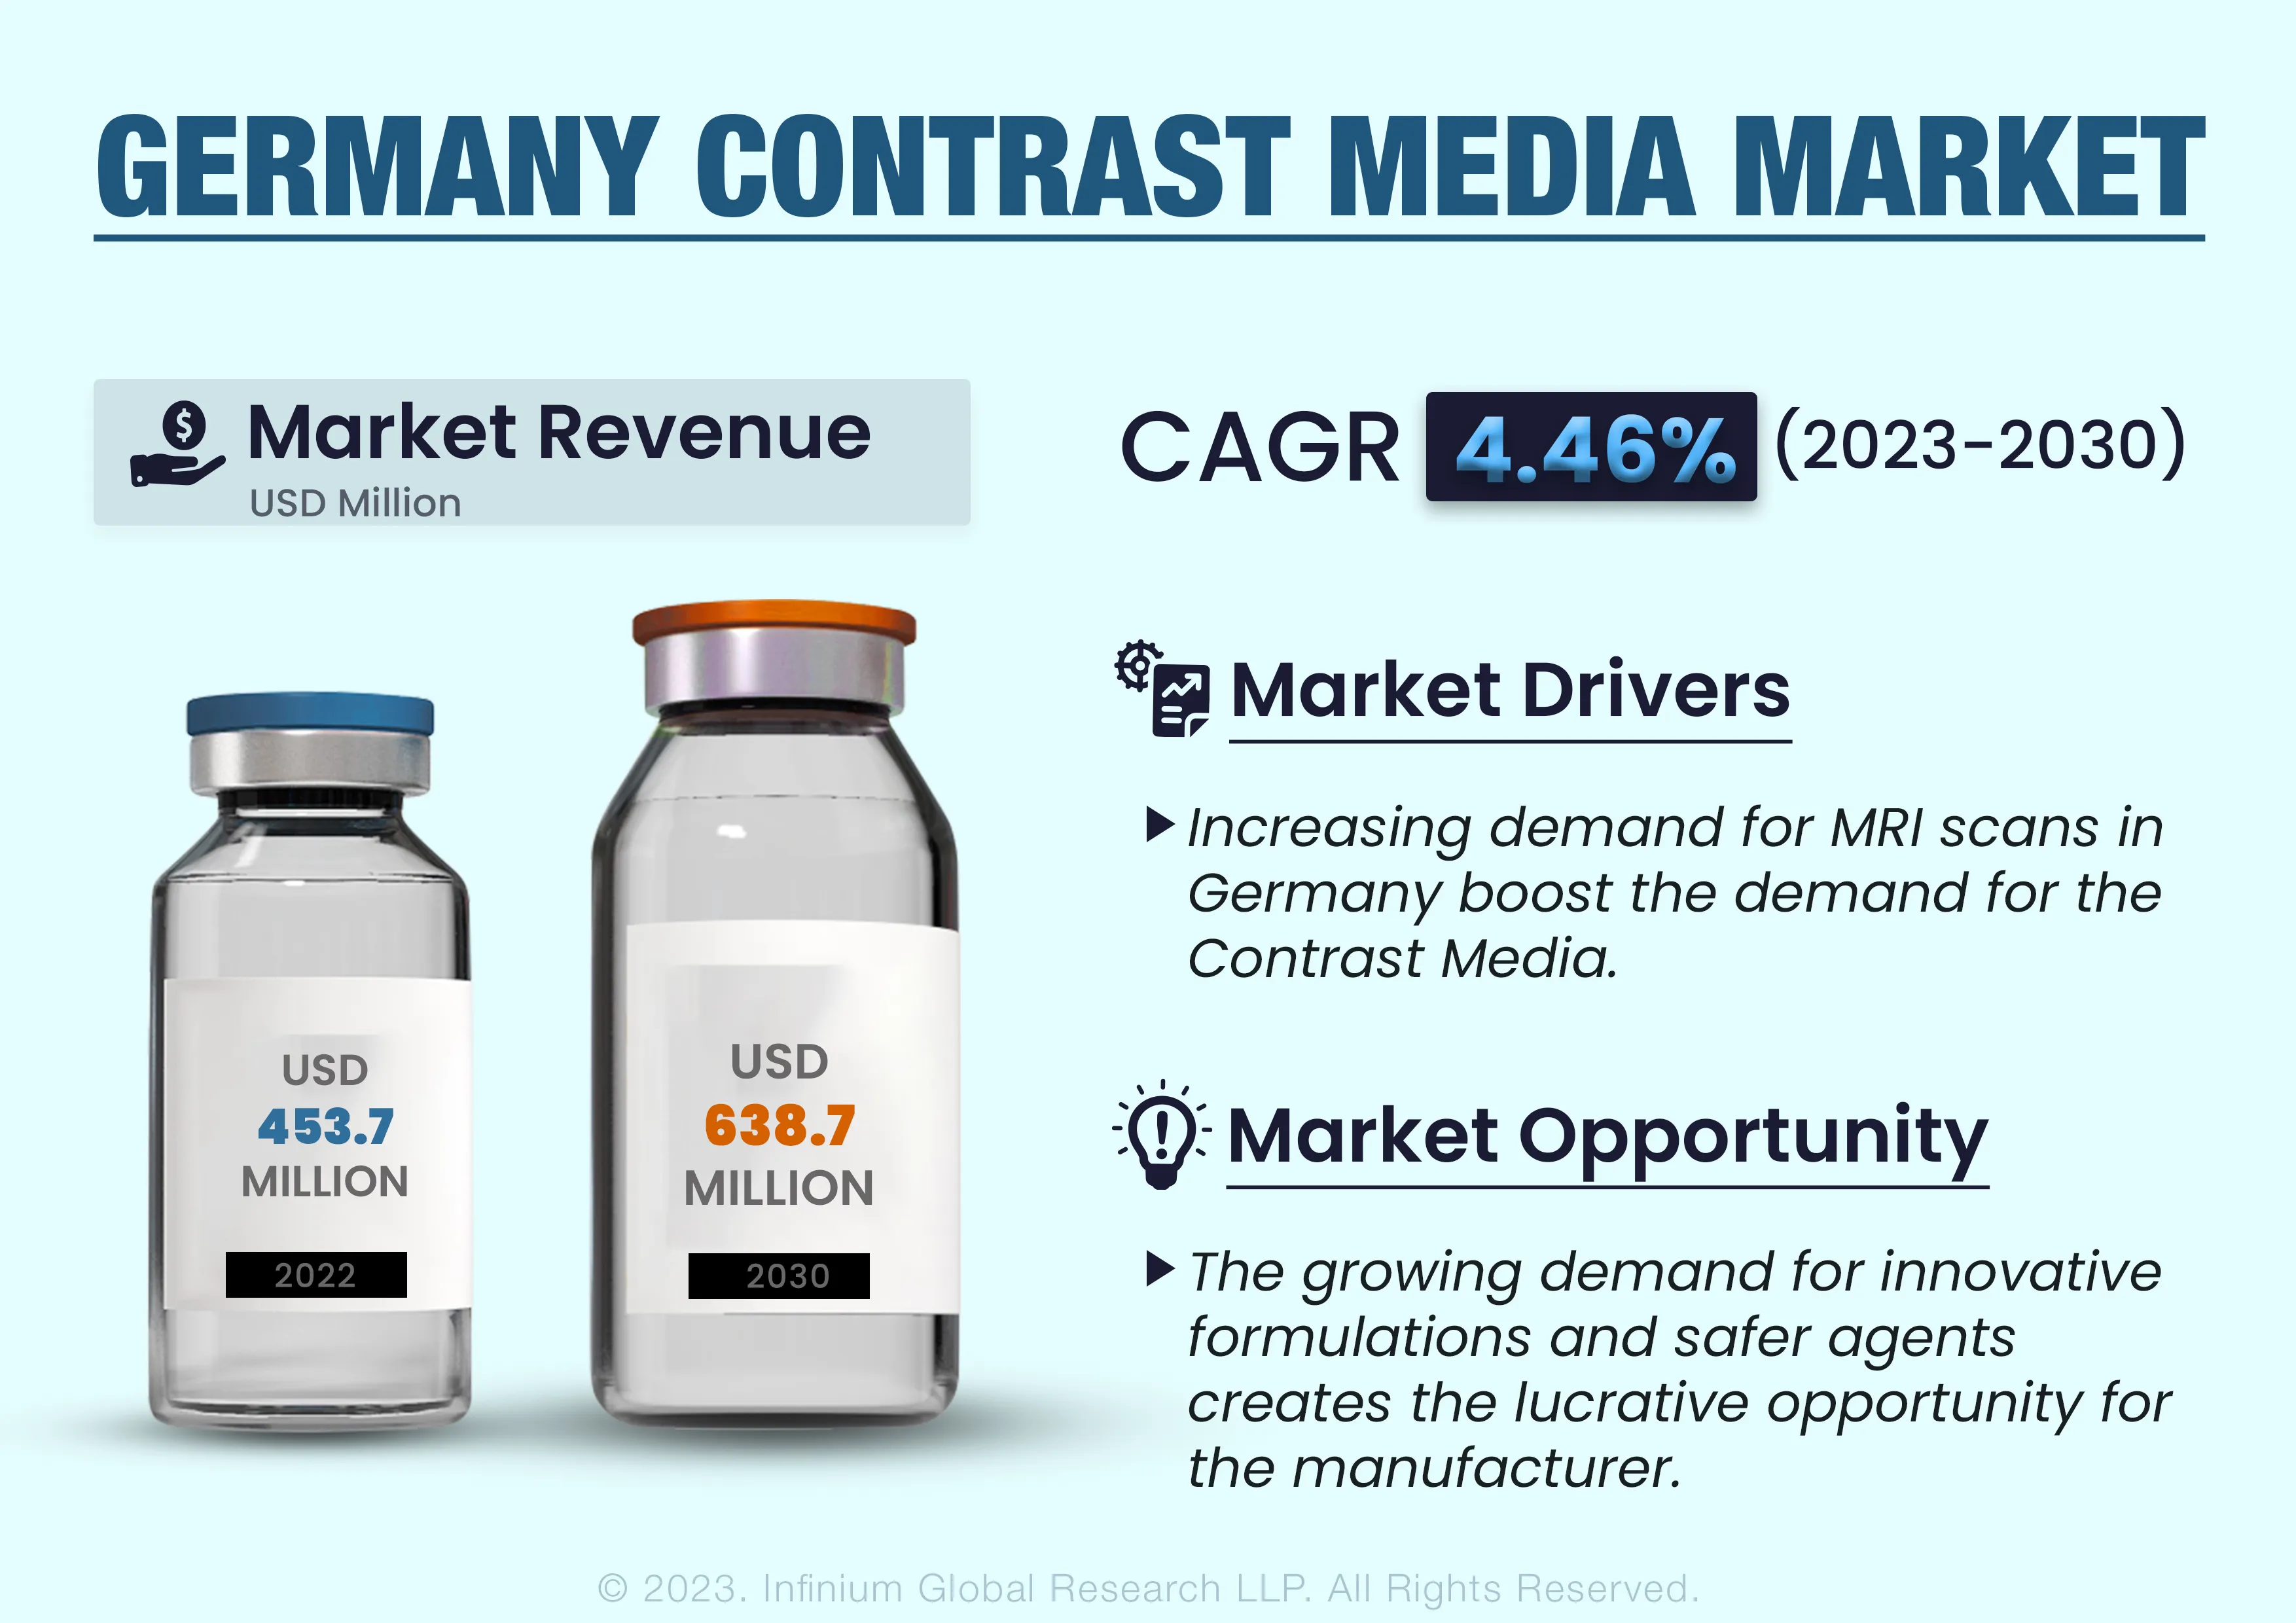 Germany Contrast Media Market was Valued at USD 453.71 Million in 2022 and is Expected to Reach USD 638.73 Million by 2030 and Grow at a CAGR of 4.46% Over the Forecast Period.